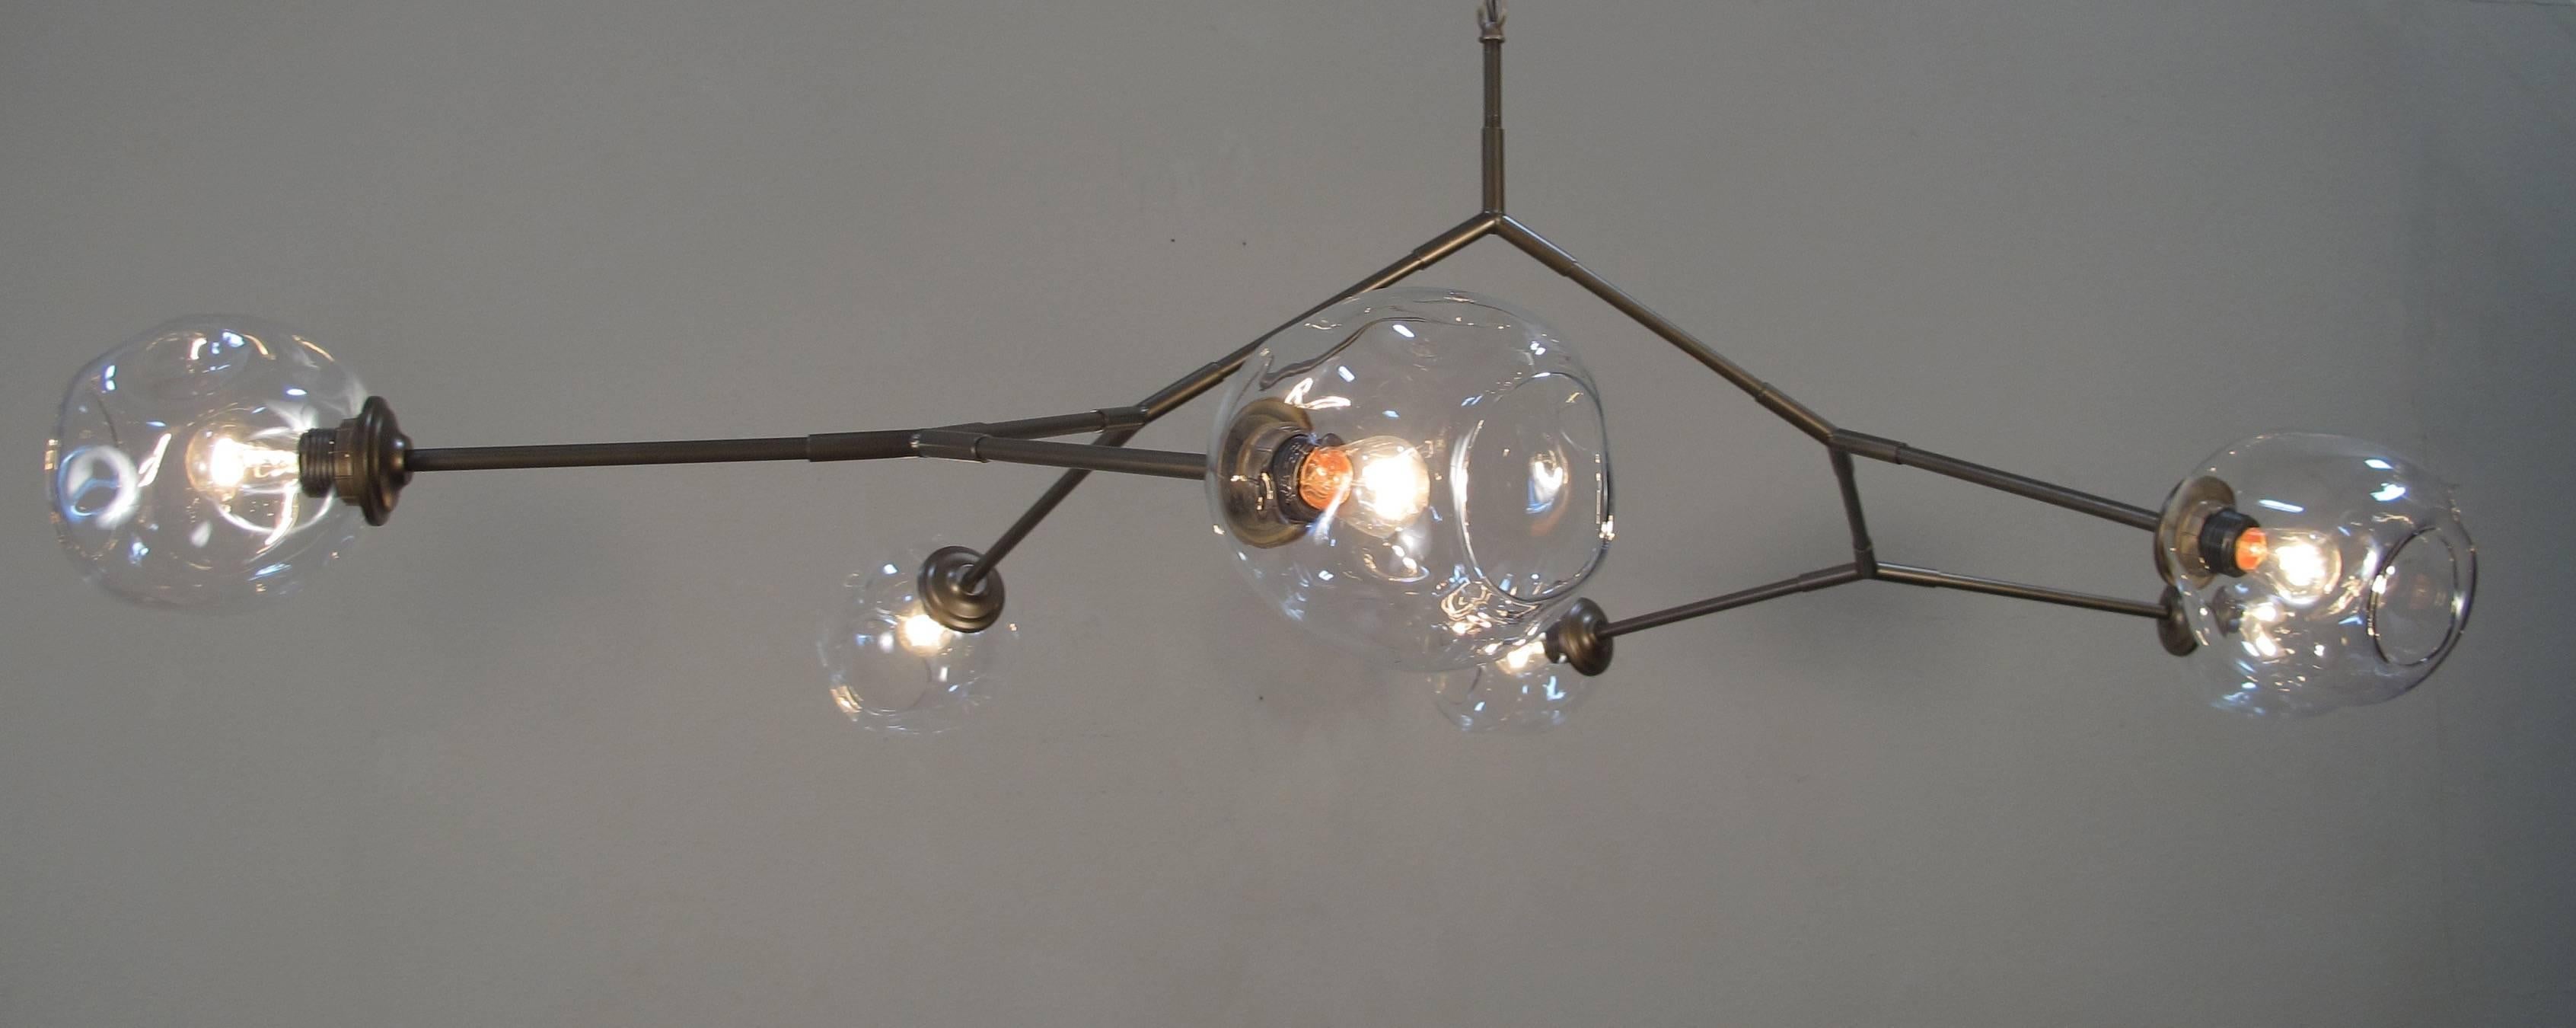 Six-light handblown glass fixture shown in painted bronze finish. Six lights. Made to order, 4-6 week lead time. Other finish options and sizes available. Finish in last picture is matte black.